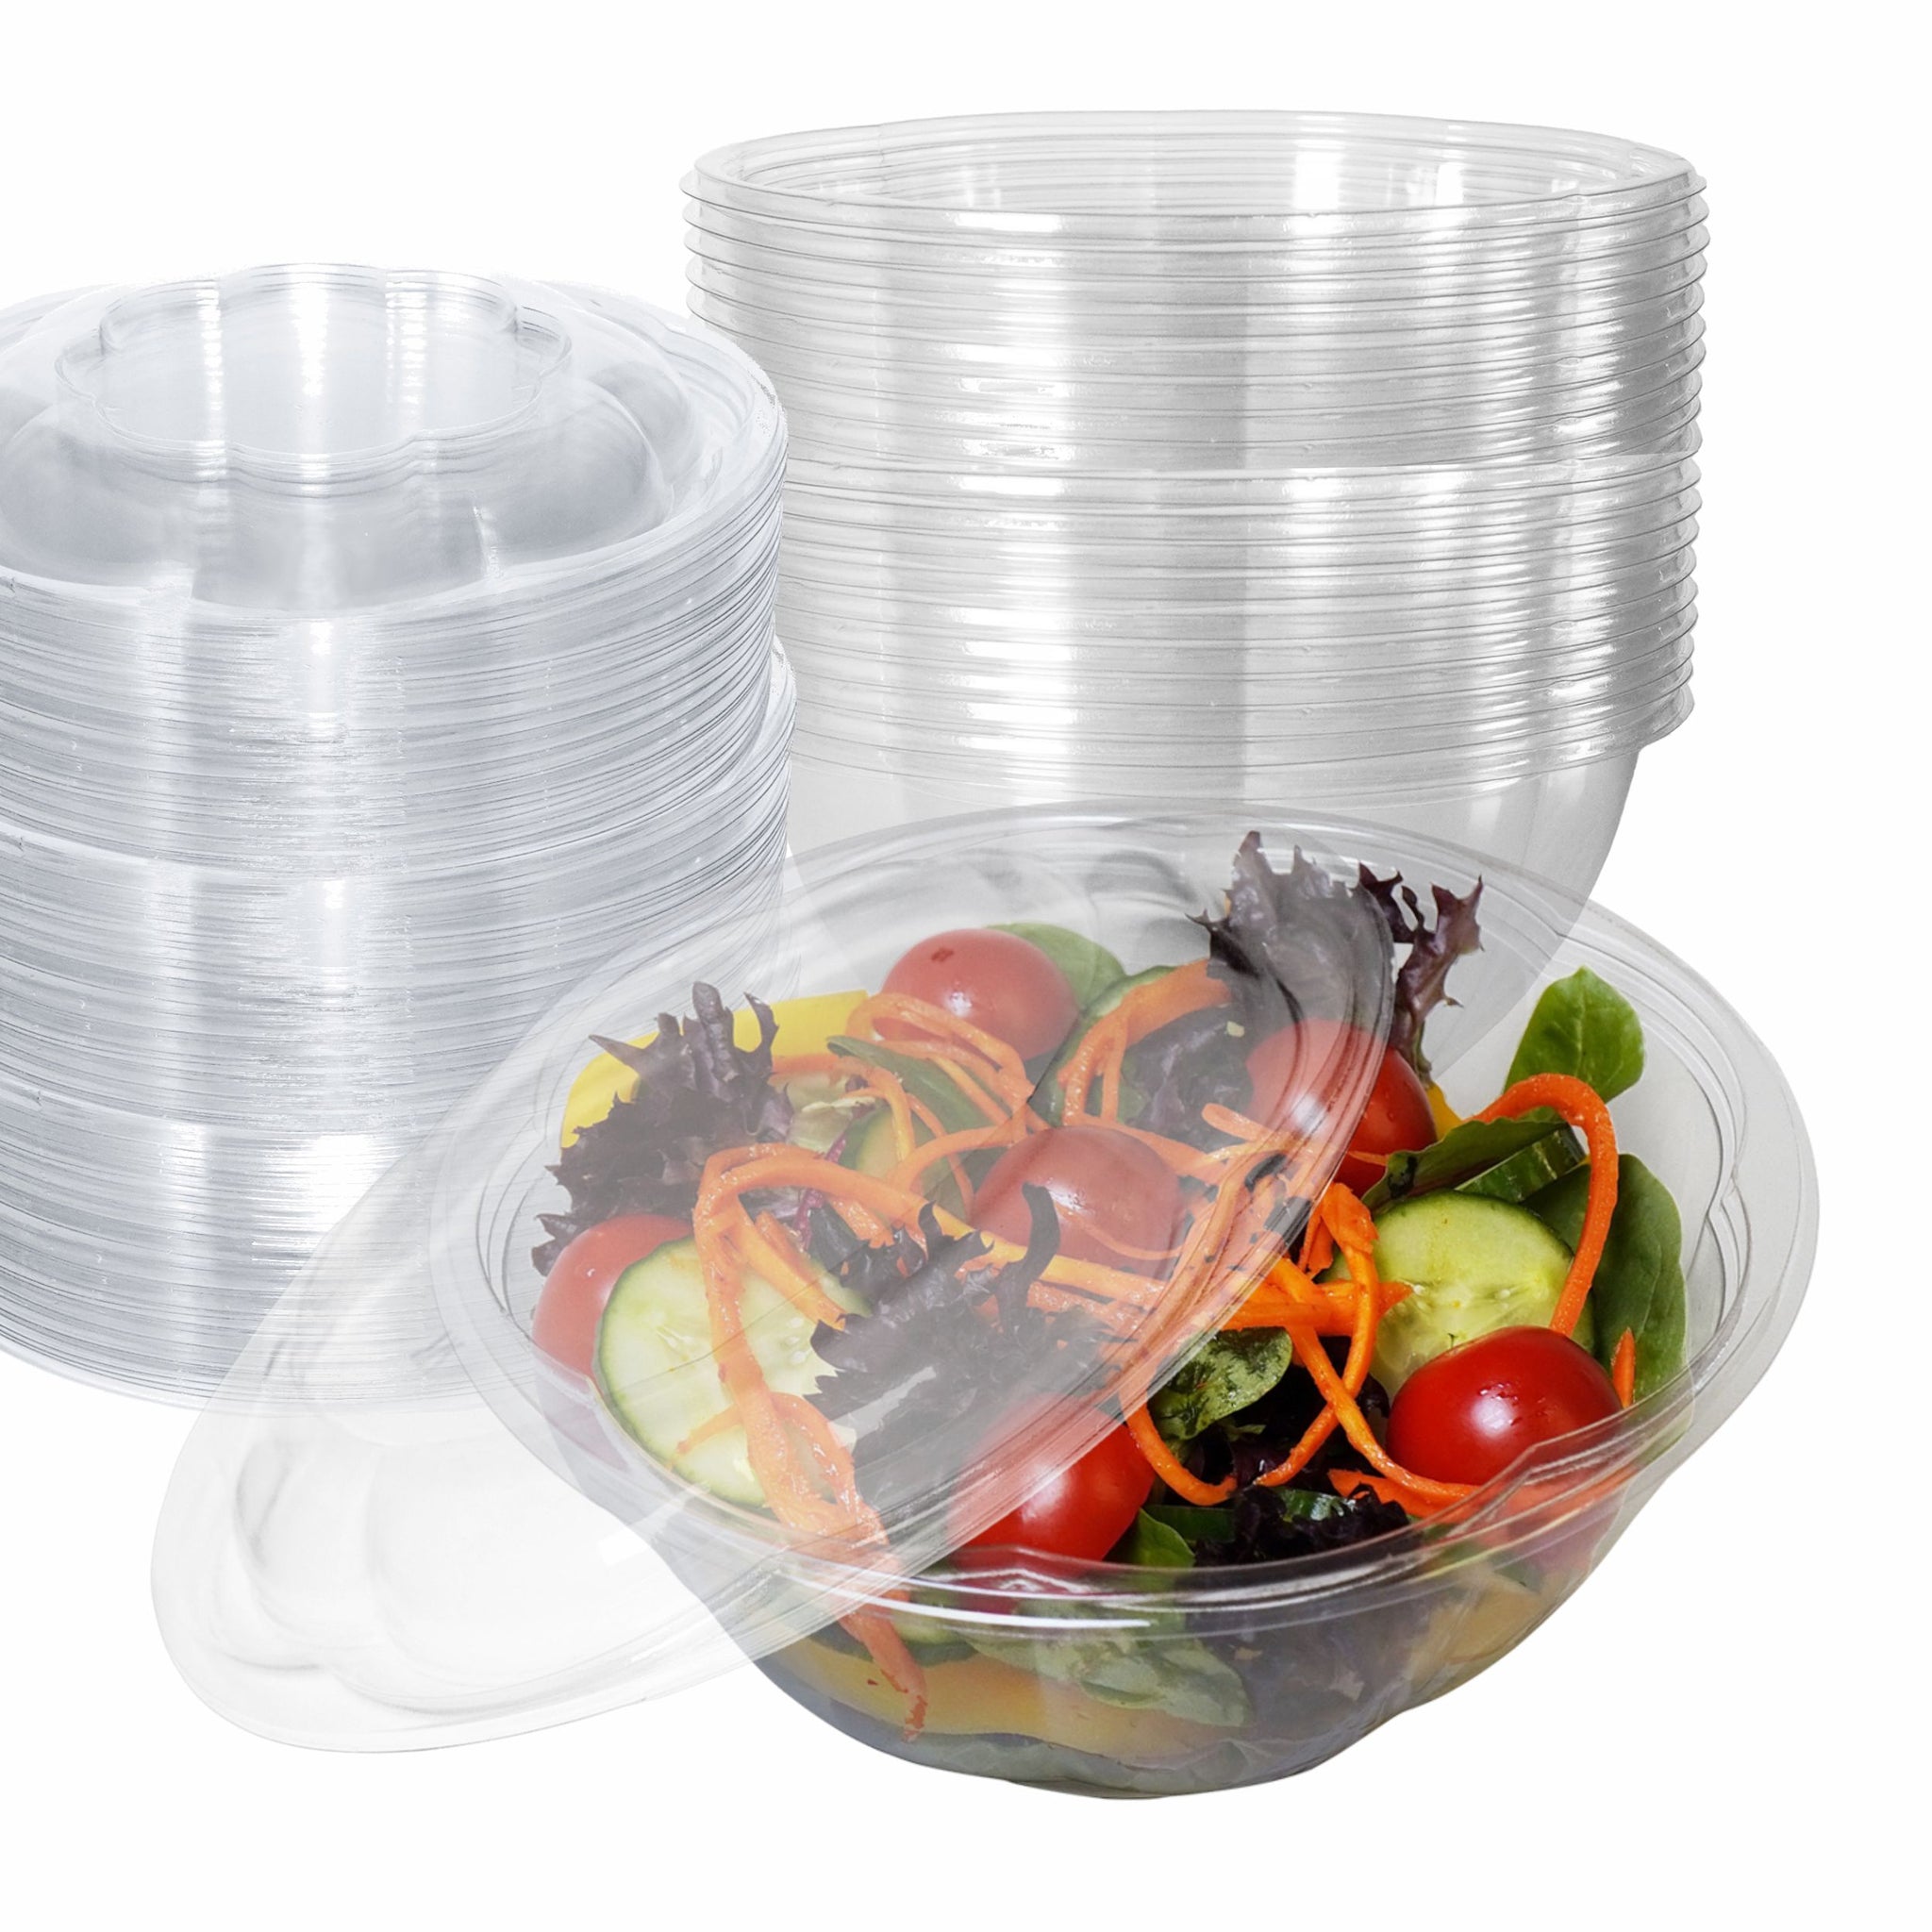 32oz Crystal Clear Plastic Disposable Salad Bowls with Lids To-Go